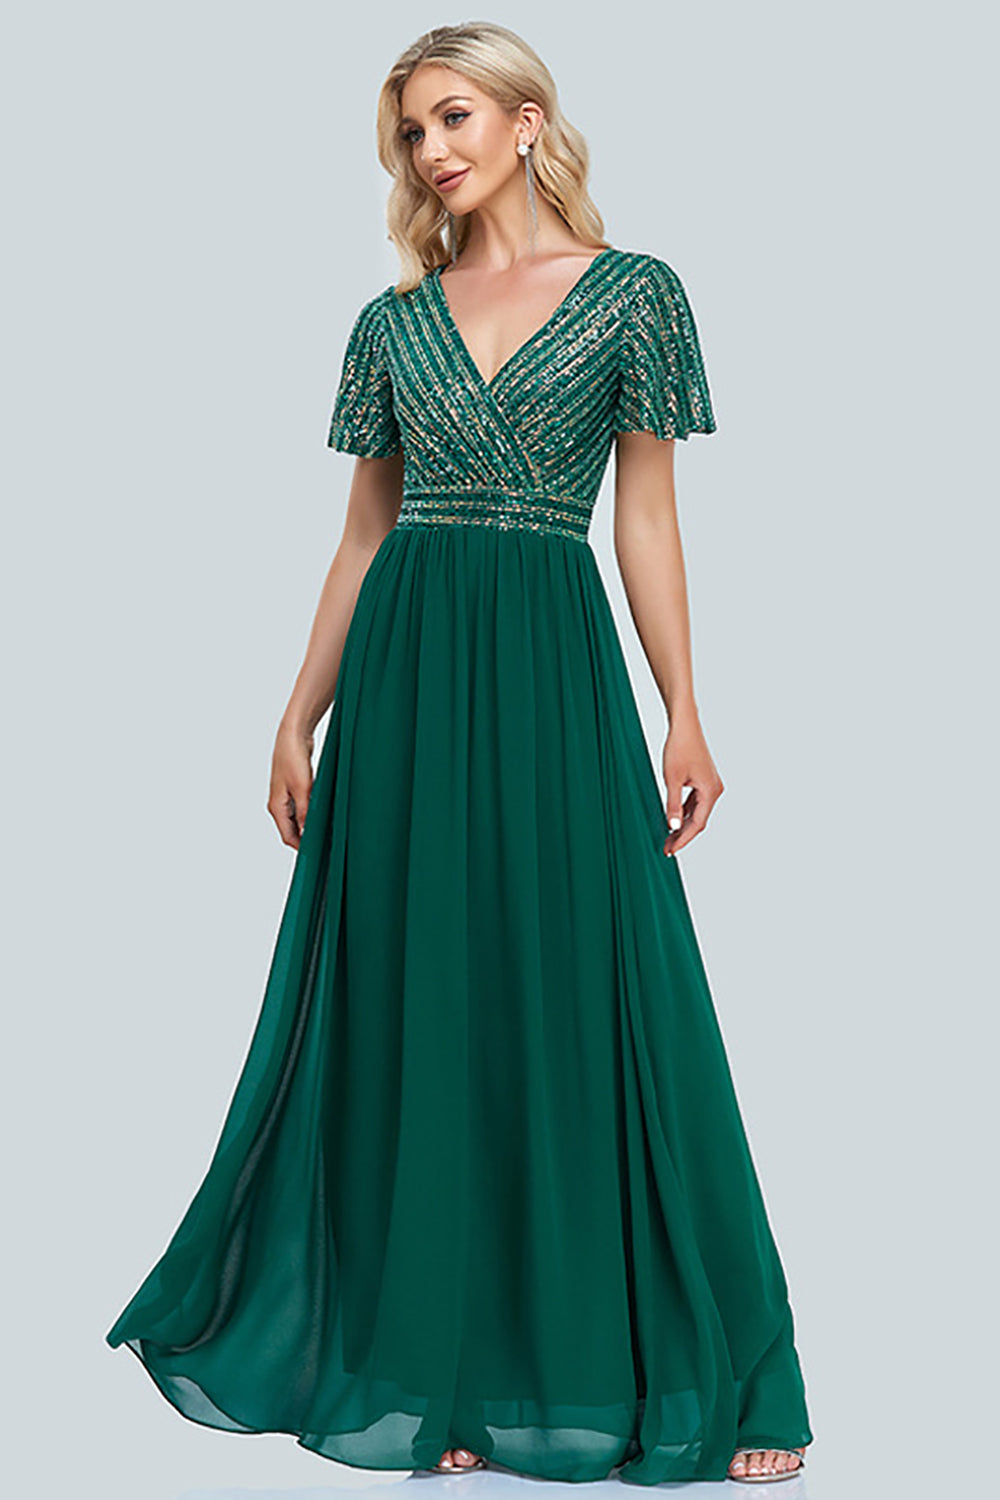 Sparkly Green Chiffon Beaded Mother of the Bride Dress